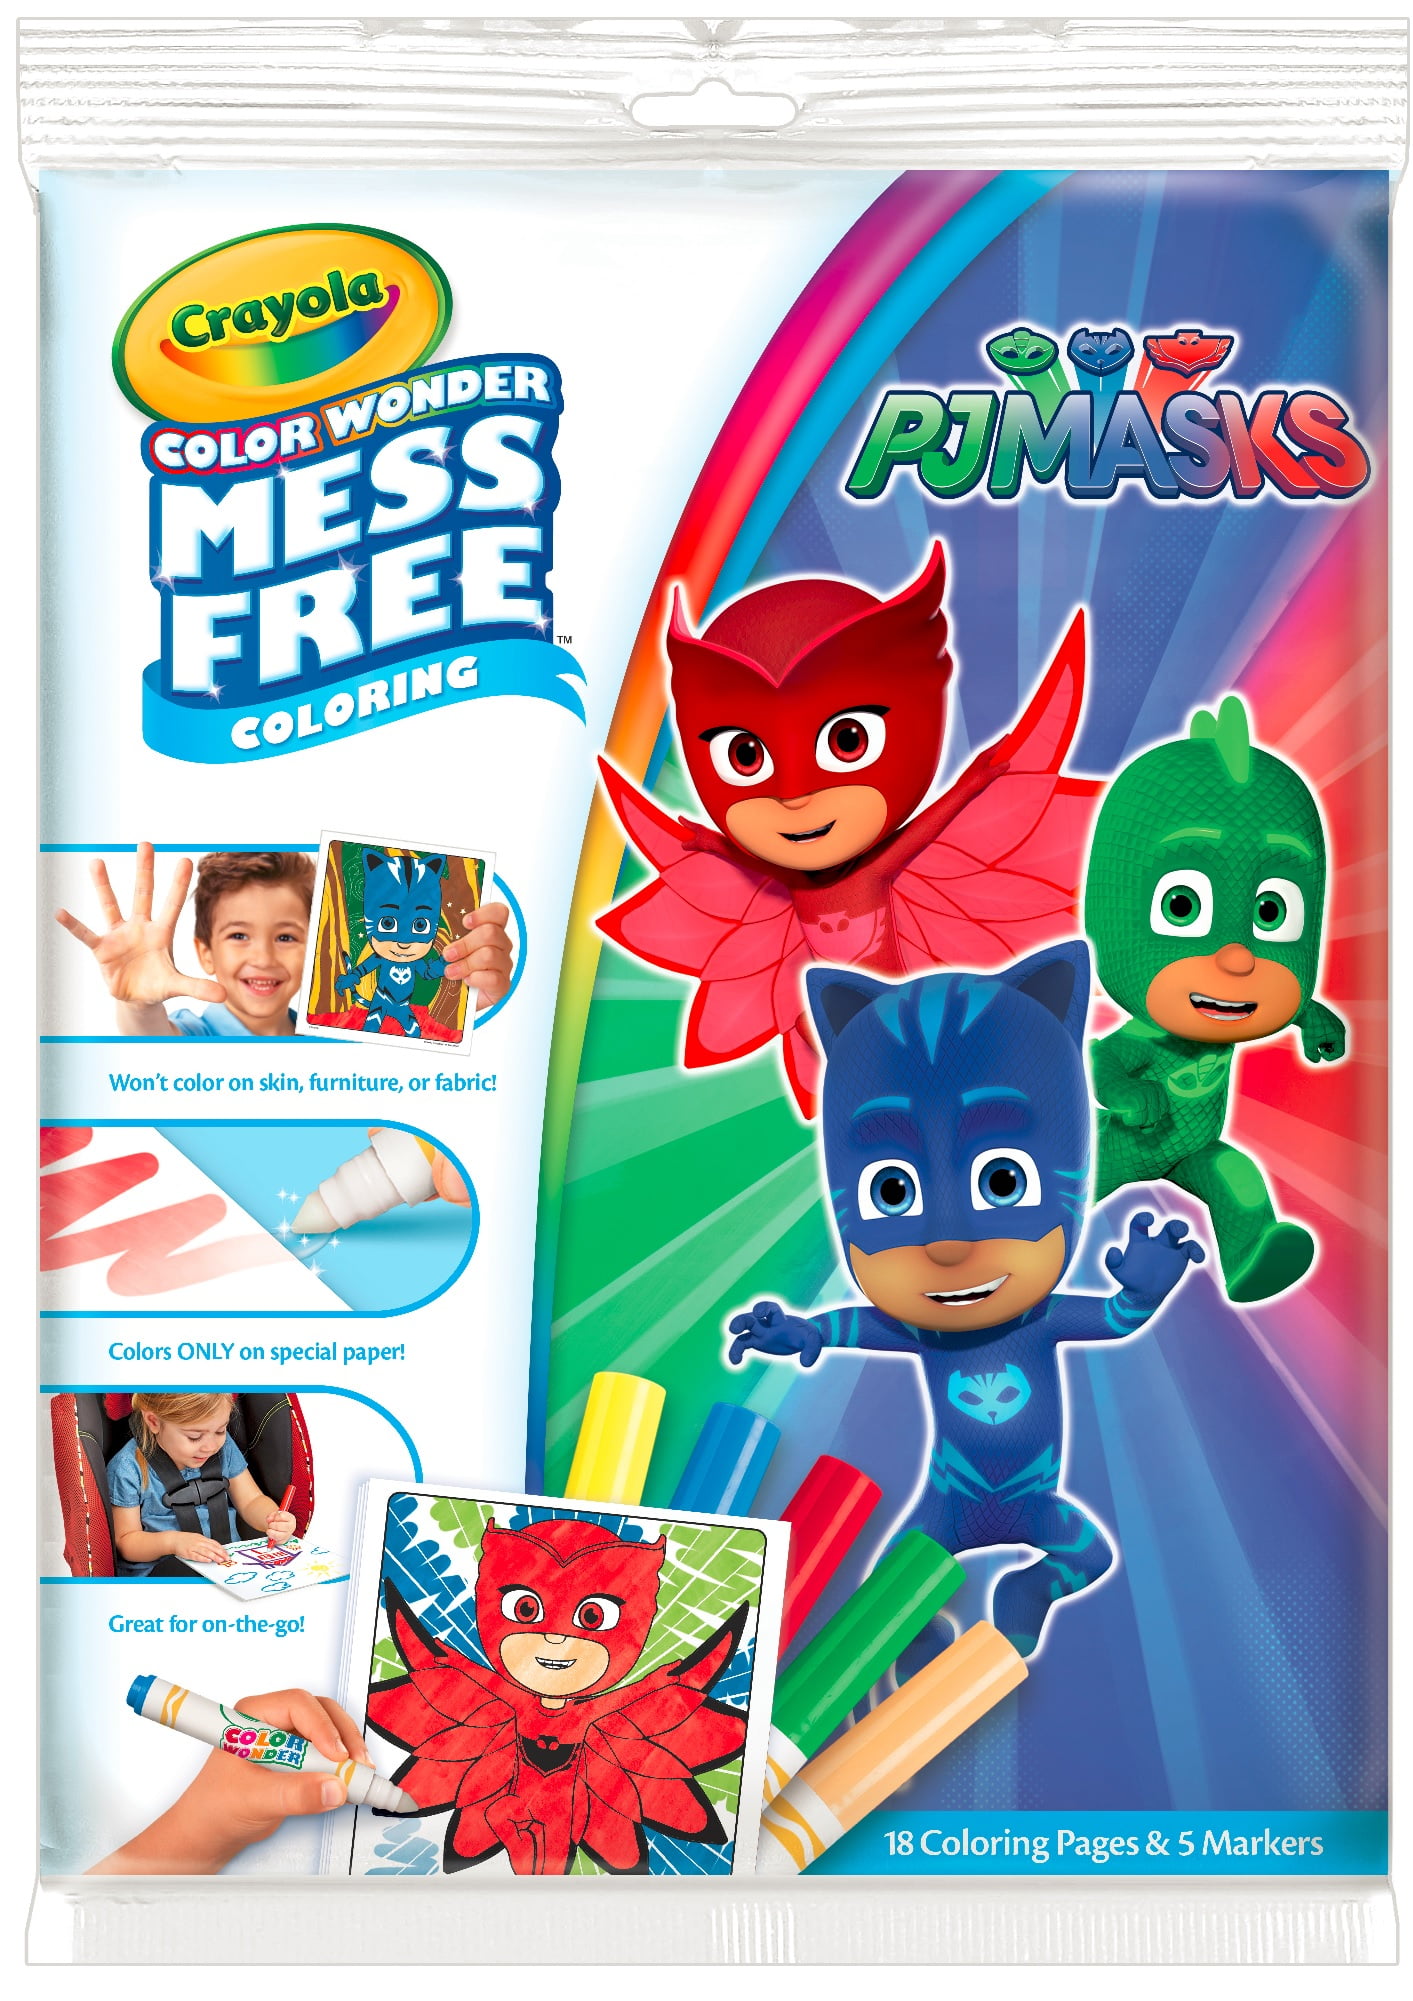 6 4 Mess Free Coloring 5 Gift for Kids Crayola Color Wonder PJ Masks Coloring Book Pages & Markers Age 3 